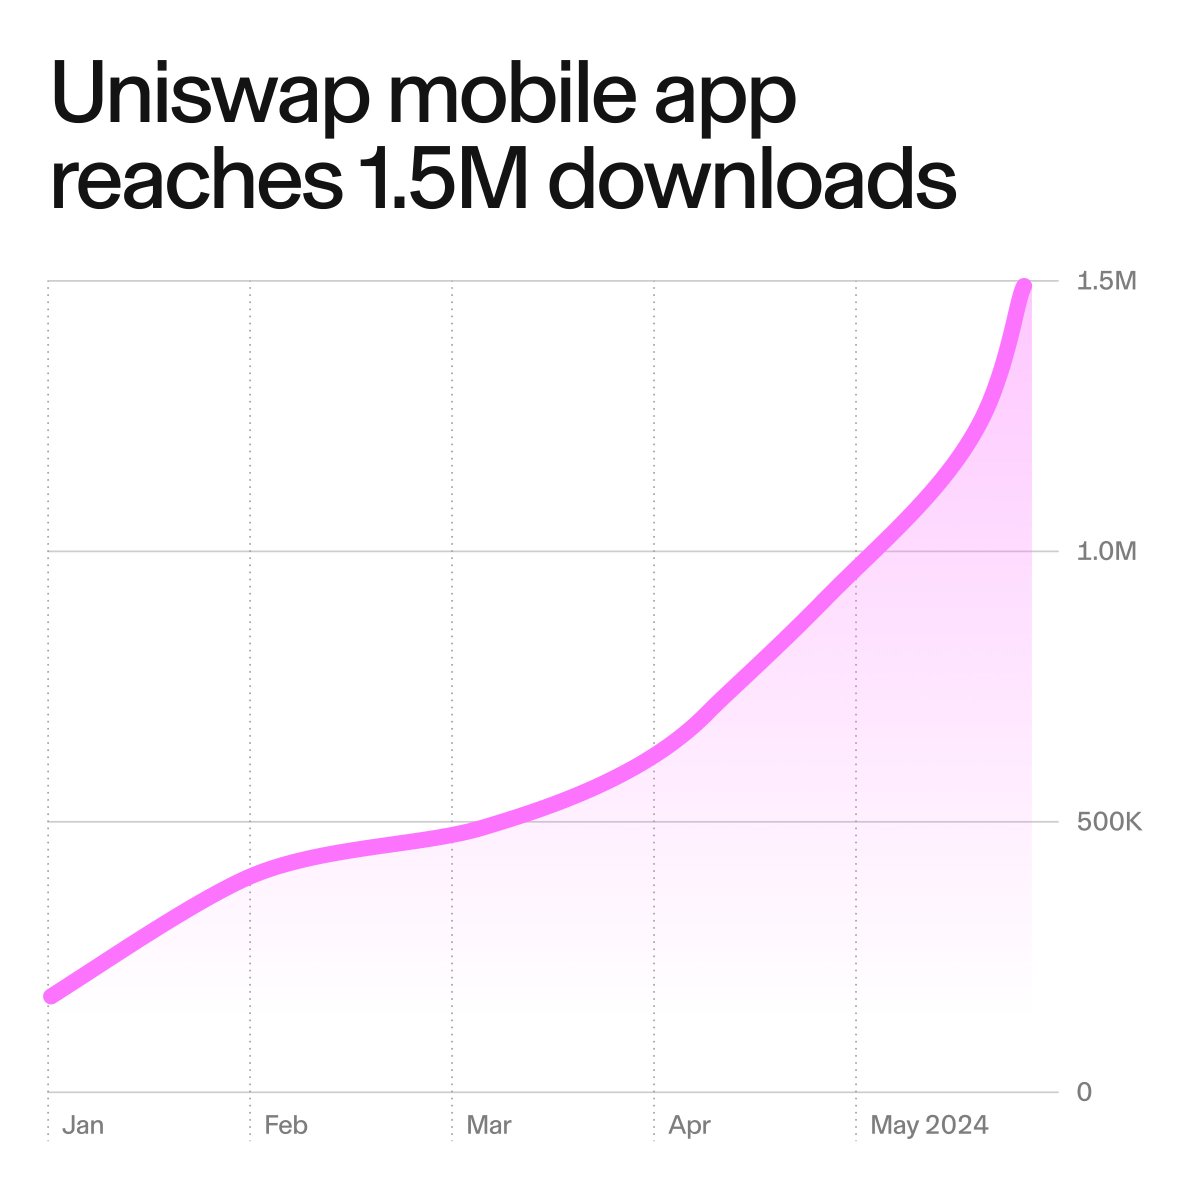 Just crossed 1.5M downloads on the Uniswap mobile app

Making it one of the fastest growing wallets 👀